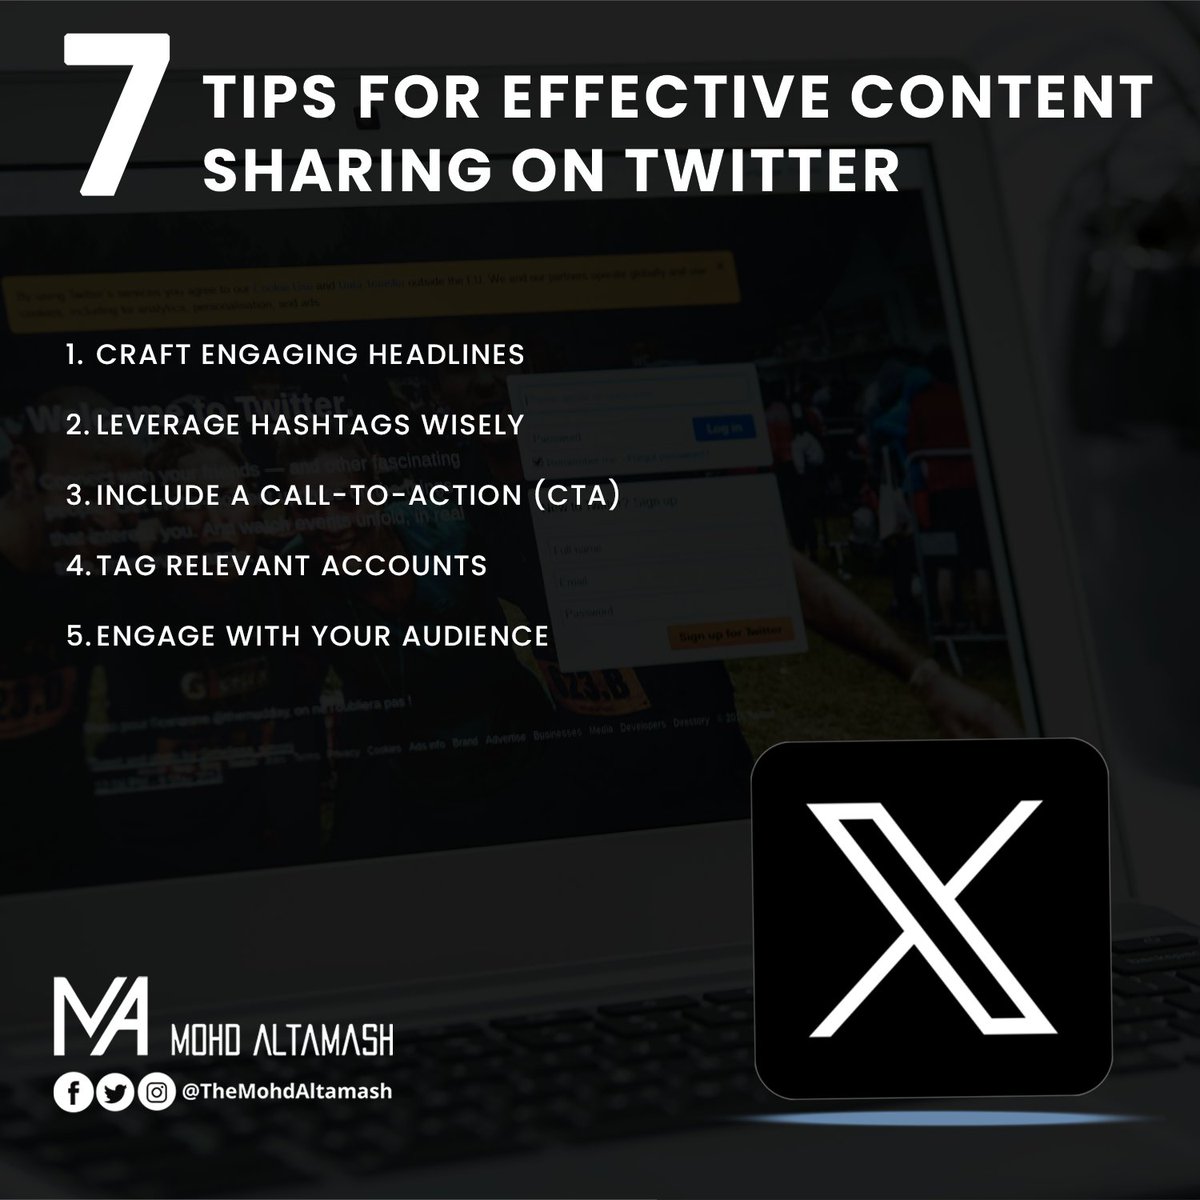 Twitter is a fast-paced platform where concise and engaging content thrives. Here's how to share your content effectively to maximize its impact

#TwitterStrategy #ContentSharing #TwitterEngagement #TwitterTips #SocialMediaMarketing #EffectiveTweets #HashtagUsage #VisualContent